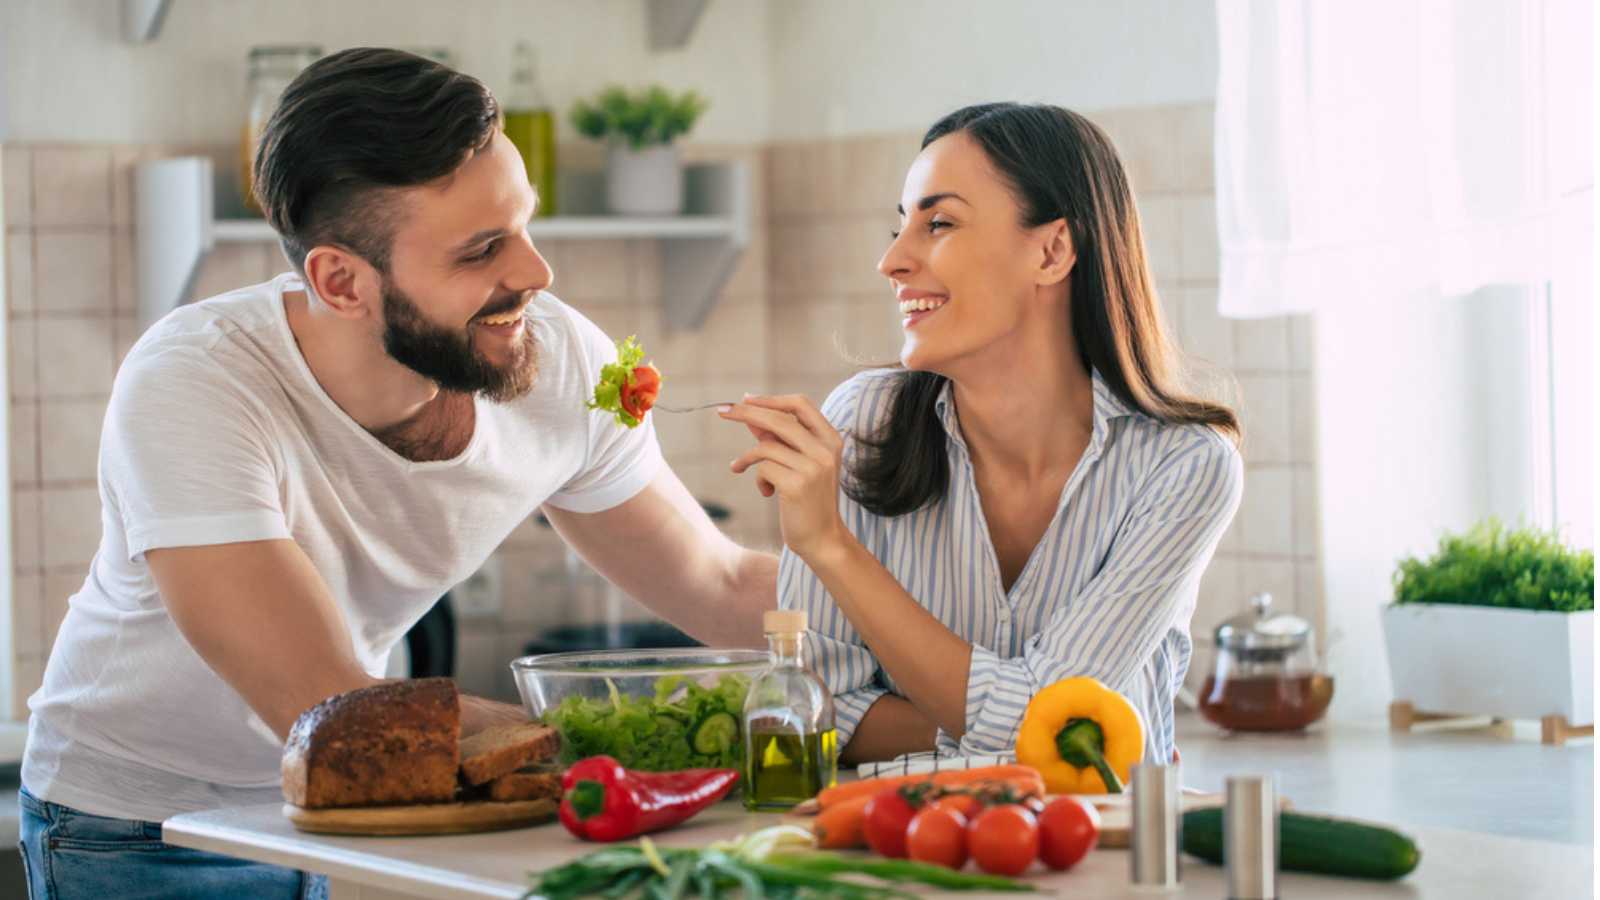 4 Woman With Husband In Kitchen Shutterstock